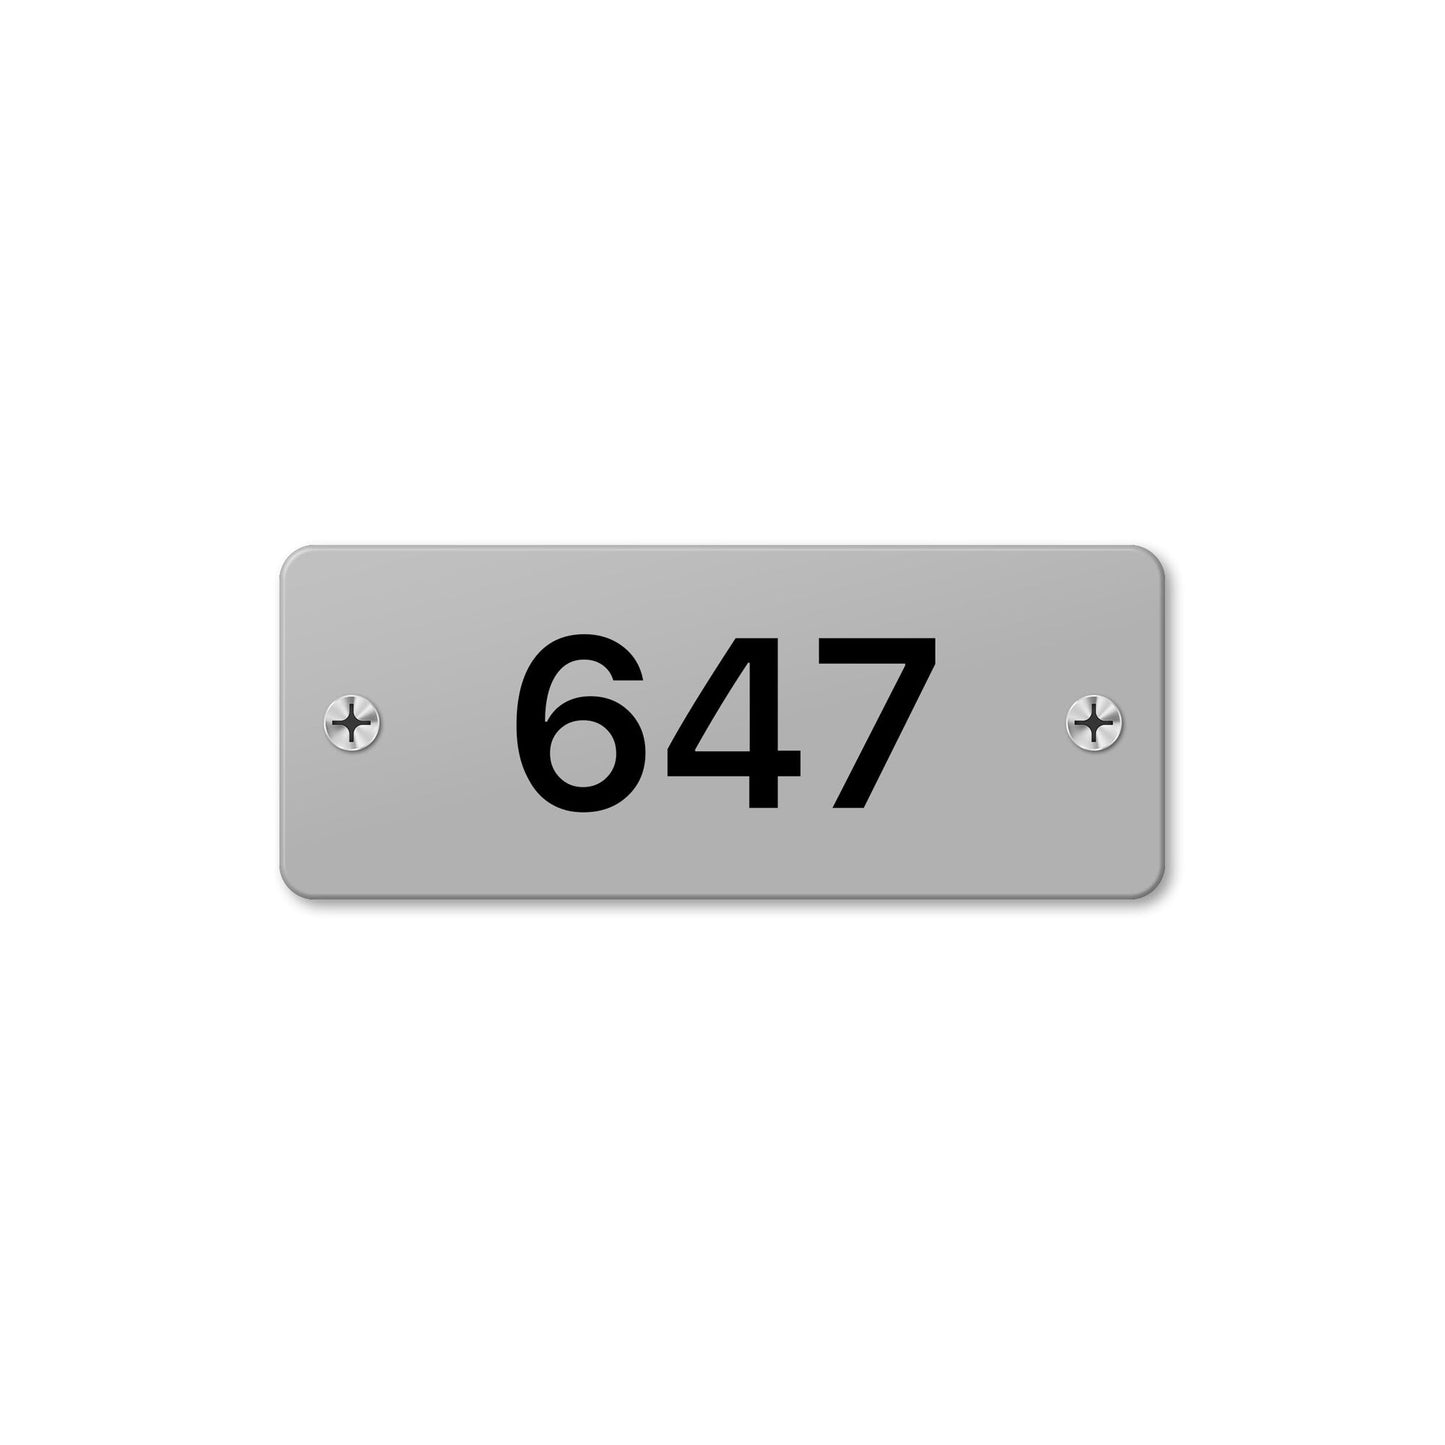 Numeral 647